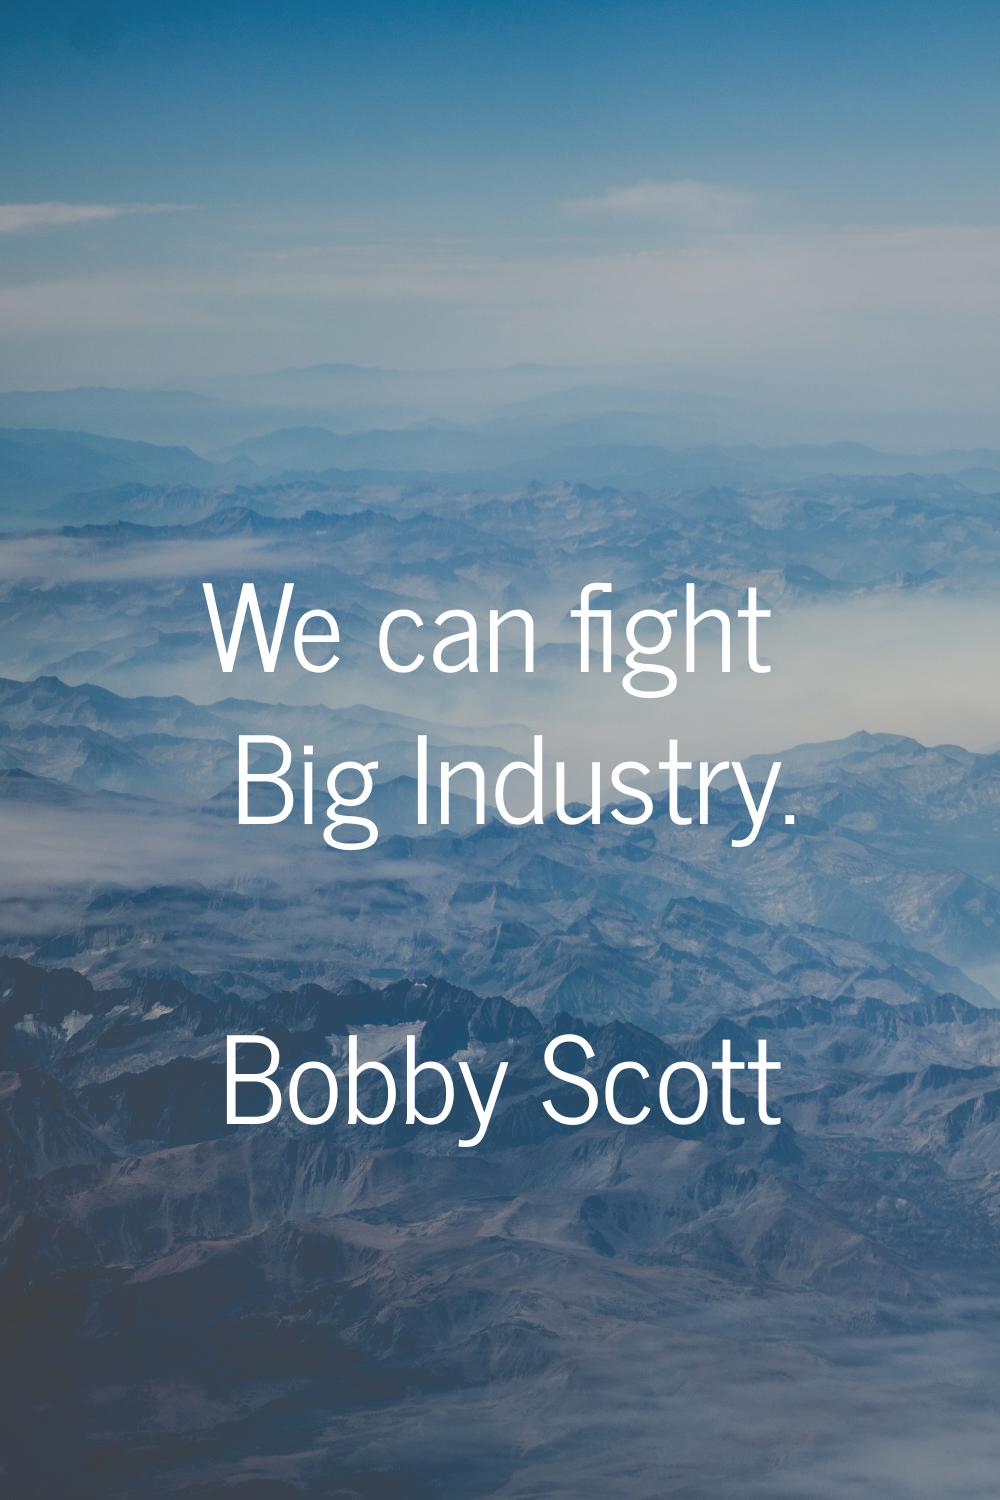 We can fight Big Industry.